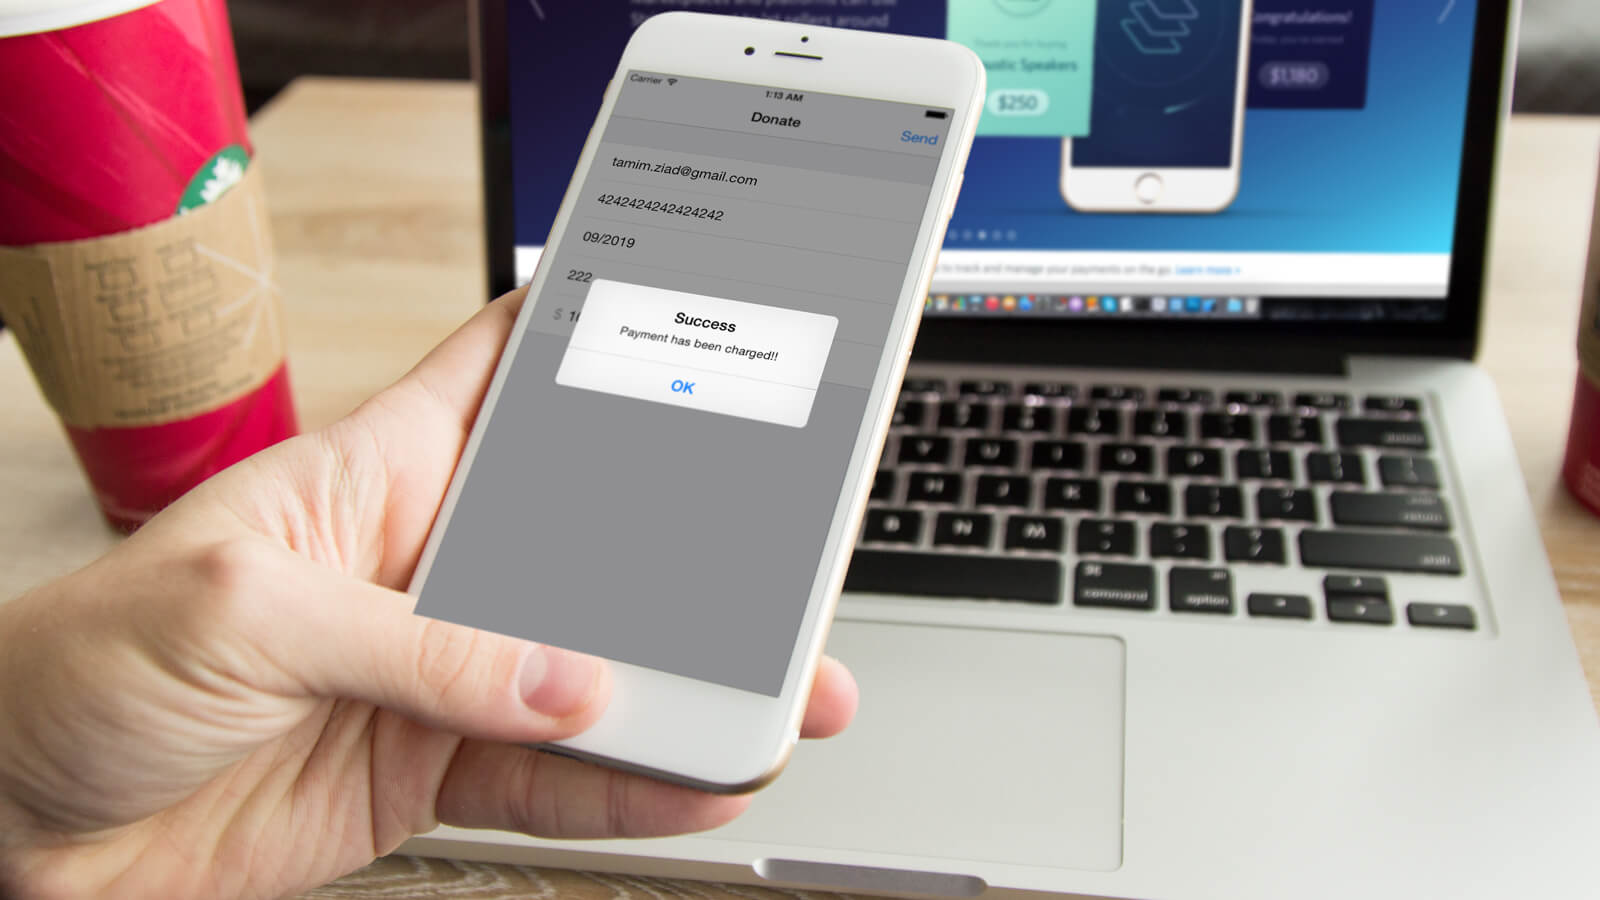 A Swift Tutorial for Stripe: Taking Credit Card Payments in iOS Apps